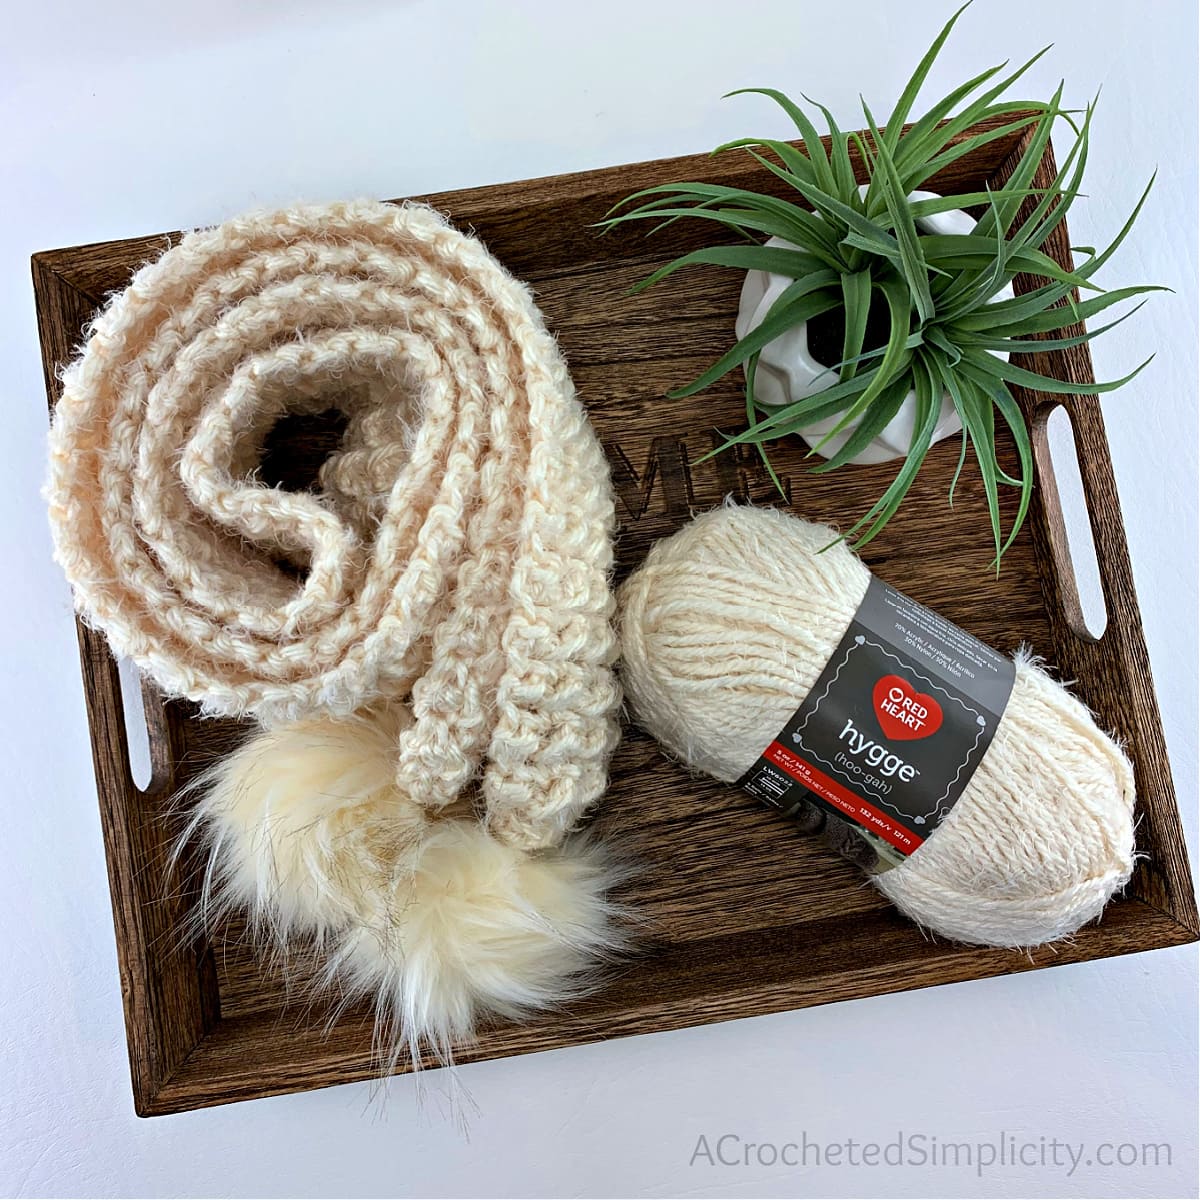 chunky crochet scarf in cream with faux fur poms rolled up on wooden tray with small plant